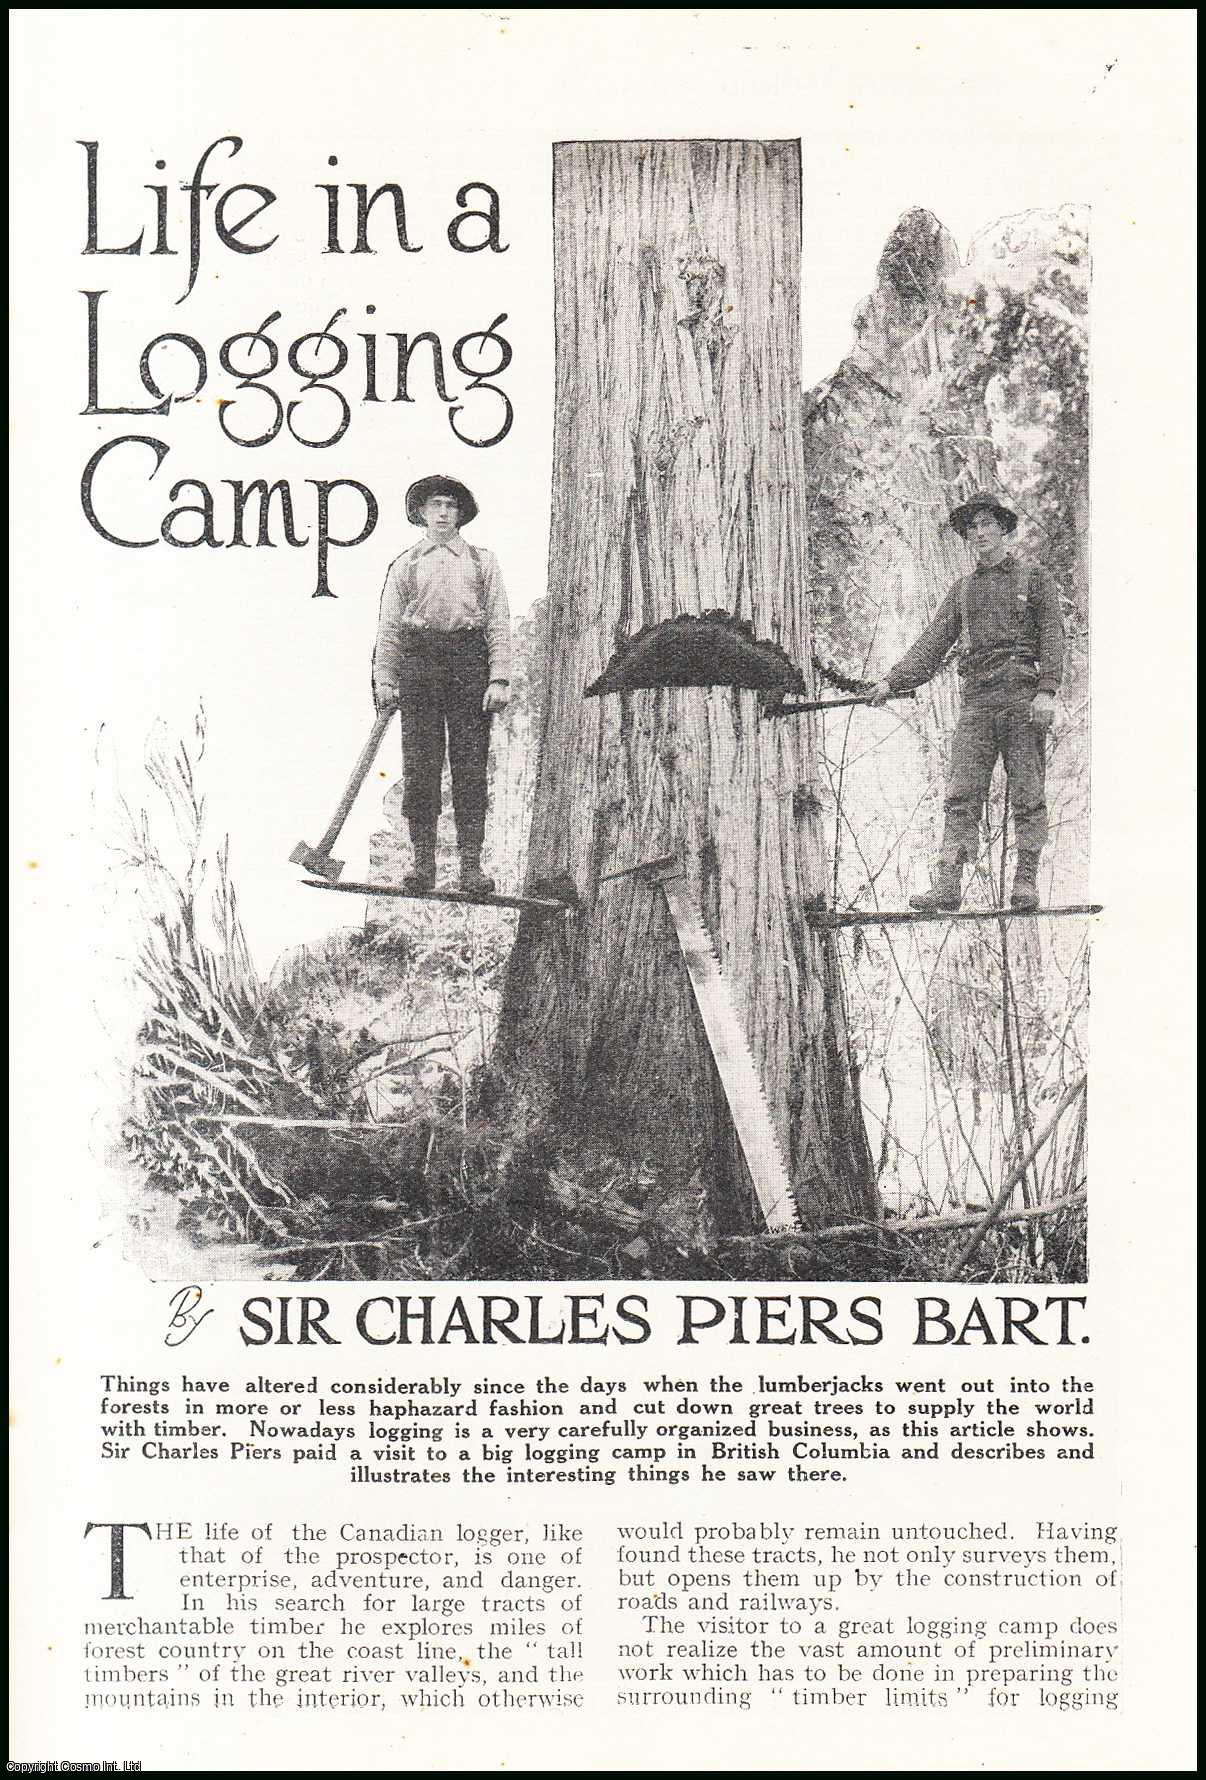 Sir Charles Piers Bart - Life in a Logging Cabin in British Columbia. An uncommon original article from the Wide World Magazine, 1925.